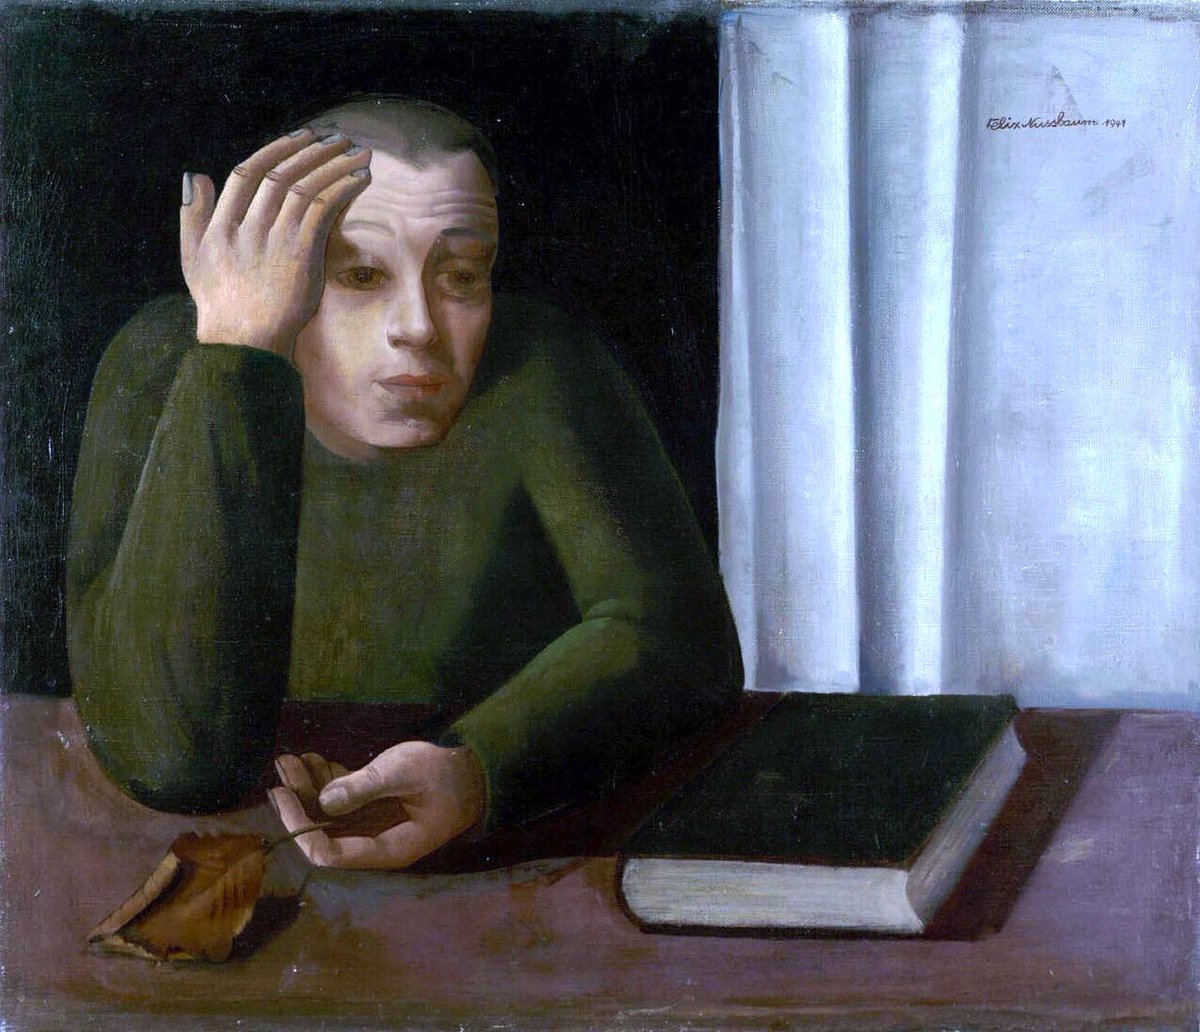 Nussbaum & his wife Felka left for Belgium (c1934) & remained there for 10 years. The Refugee, Brussels (1939), Unidentified Man (1941), Still-Life with Mask, Glove & Football (1940) & Prisoner (1940). His refugee sits with nowhere to turn as a globe stands by, indifferent.